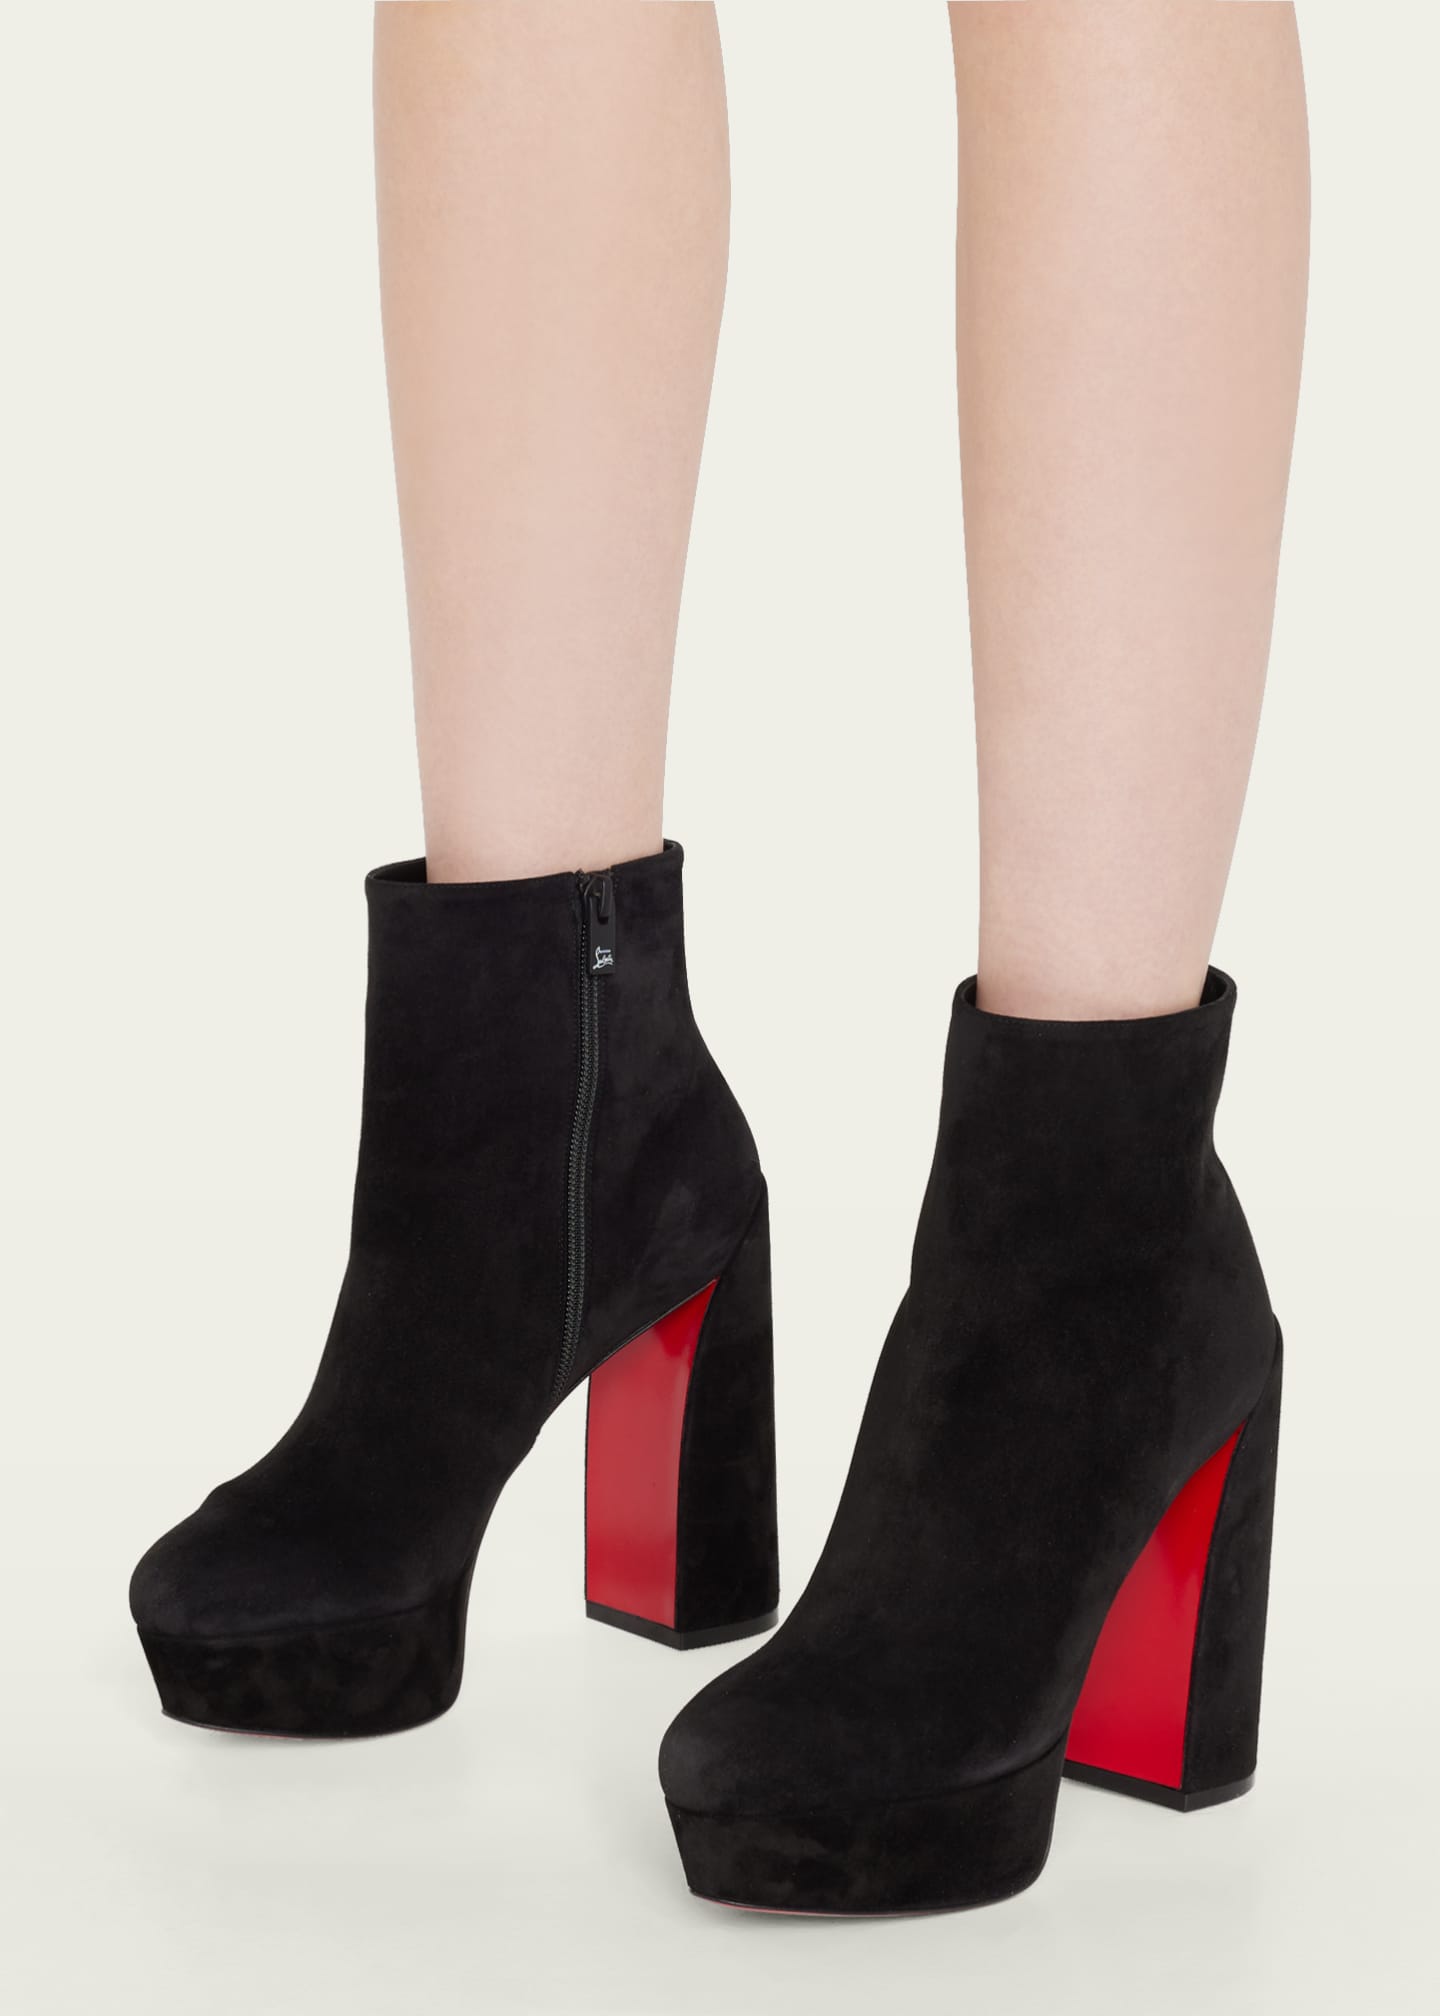 CHRISTIAN LOUBOUTIN, Red Women's Boots